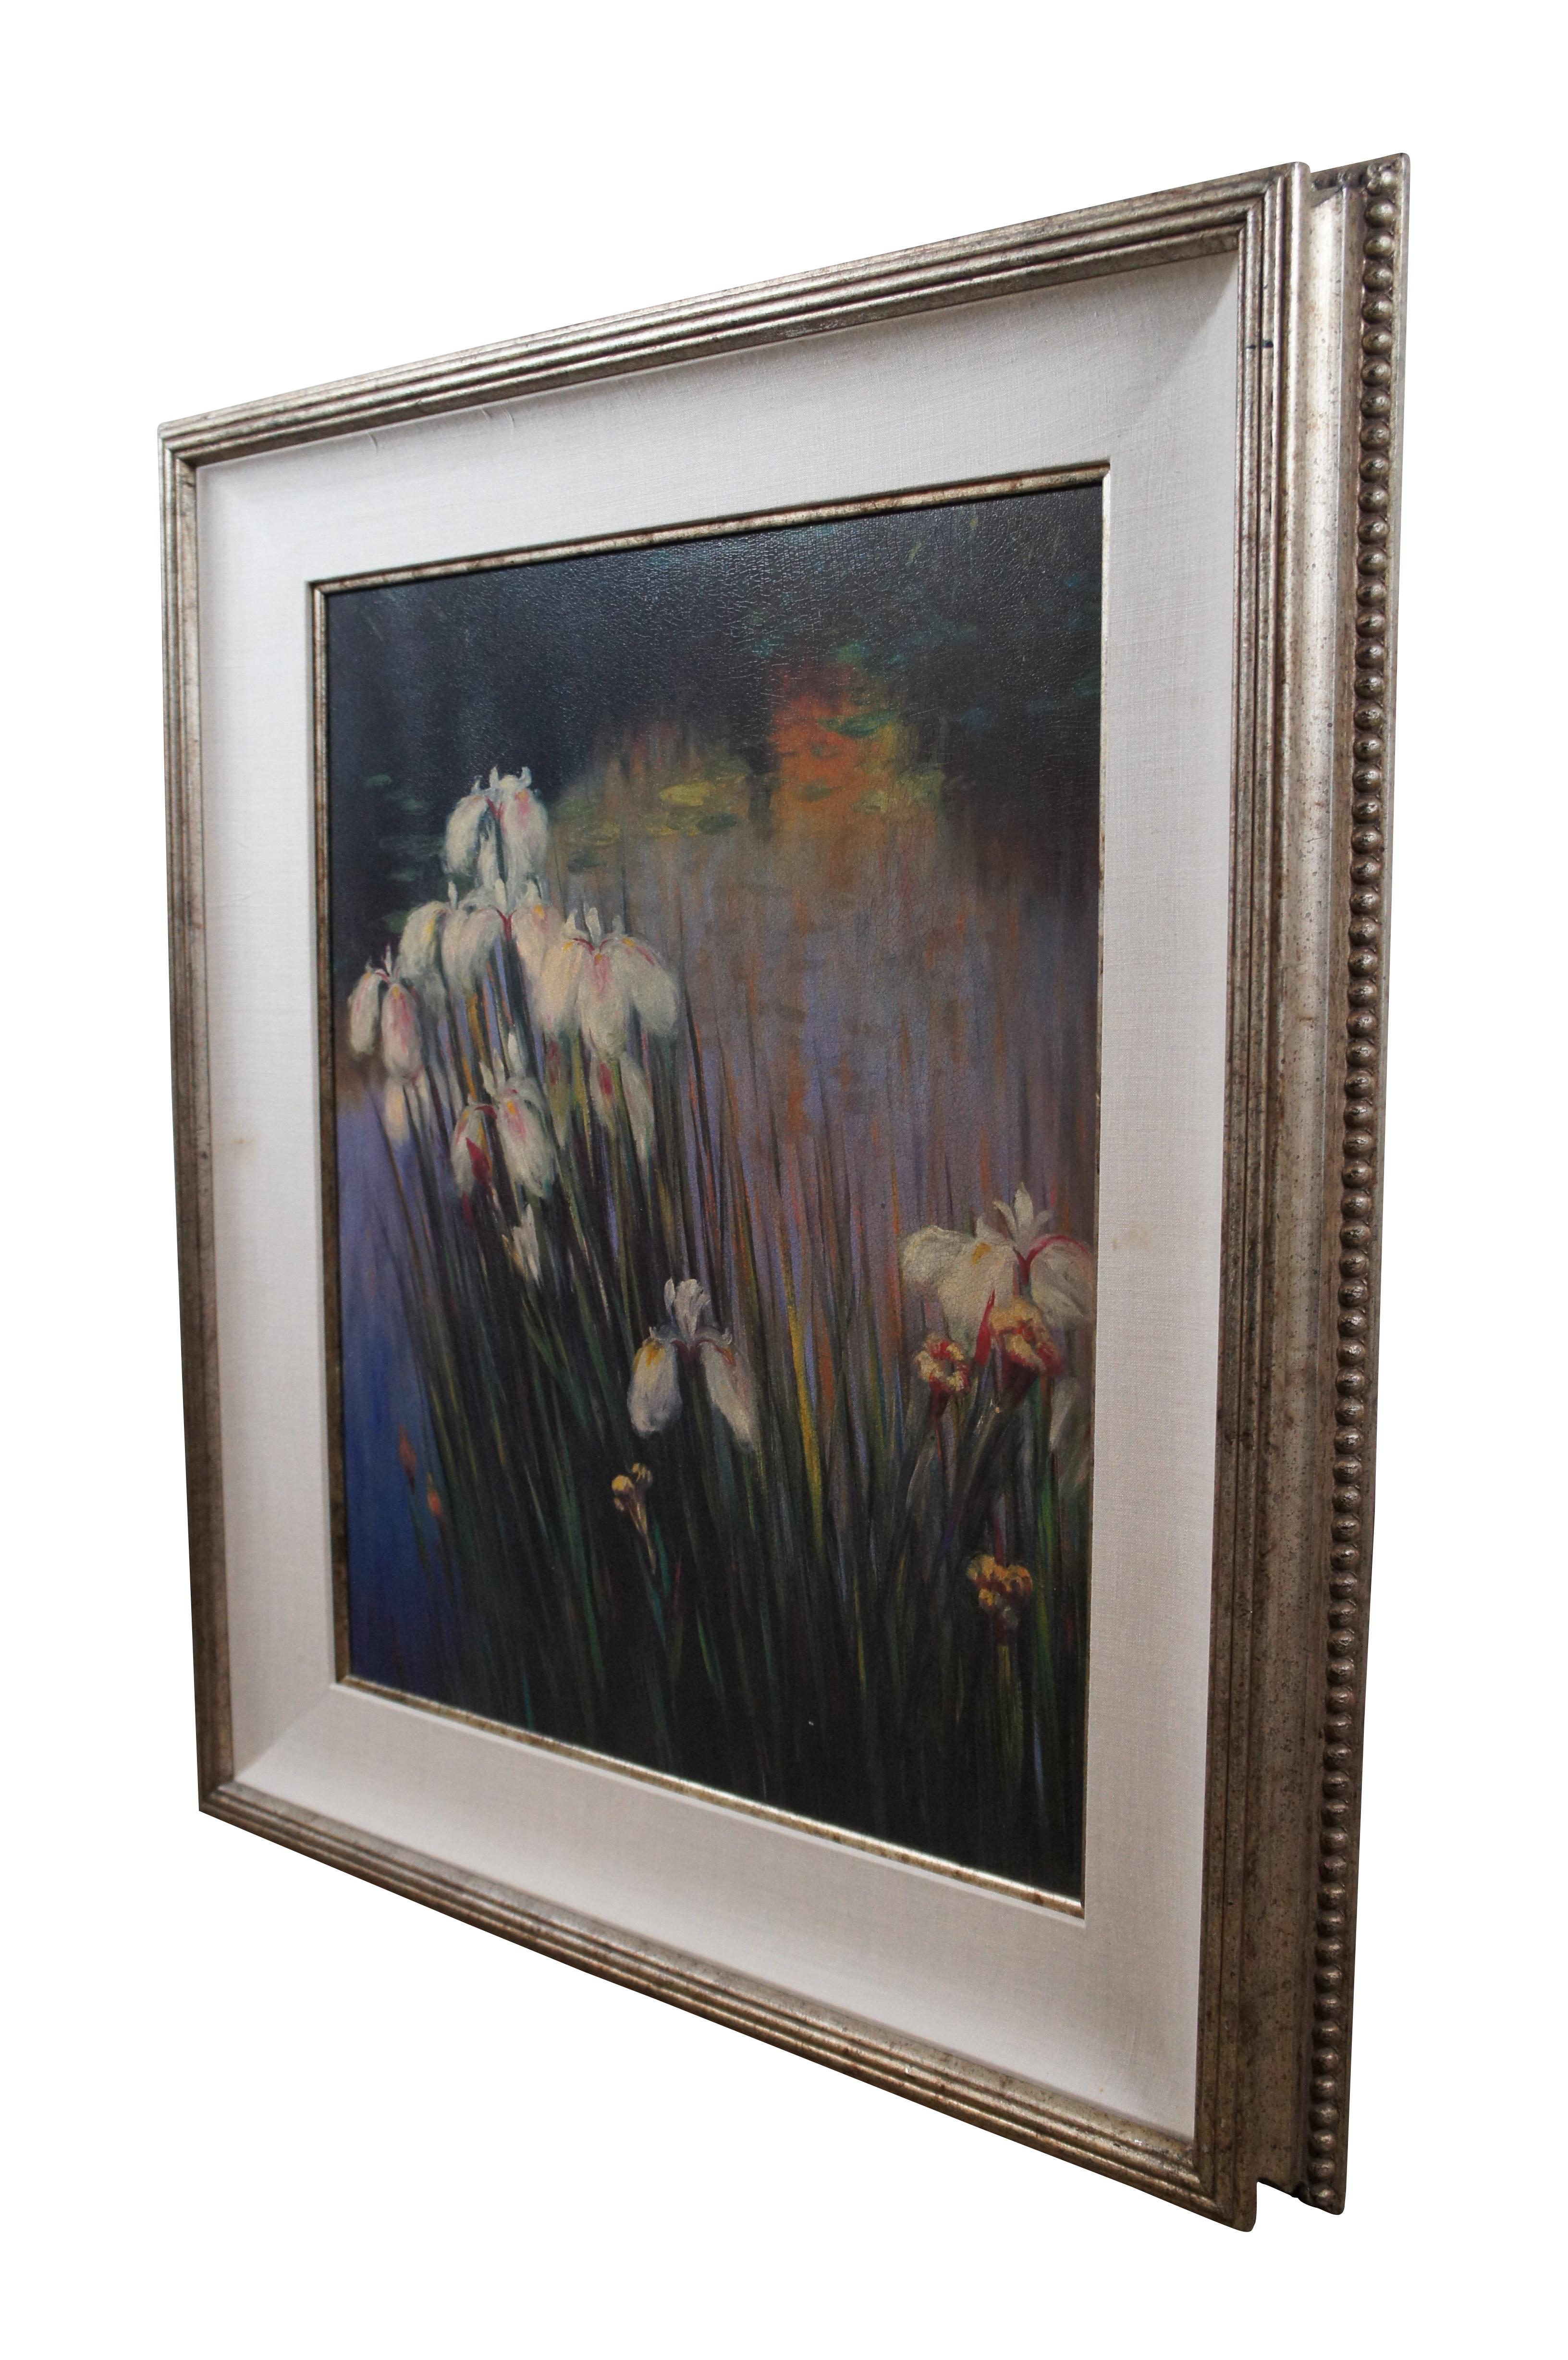 Vintage impressionist style framed print on board of “Wild Irises” by Greg Singley, showing a group of white irises growing at the edge of a pond.

“An illustrator and painter of oil on canvas, Greg Singley (b. 1950) has worked as a newspaper